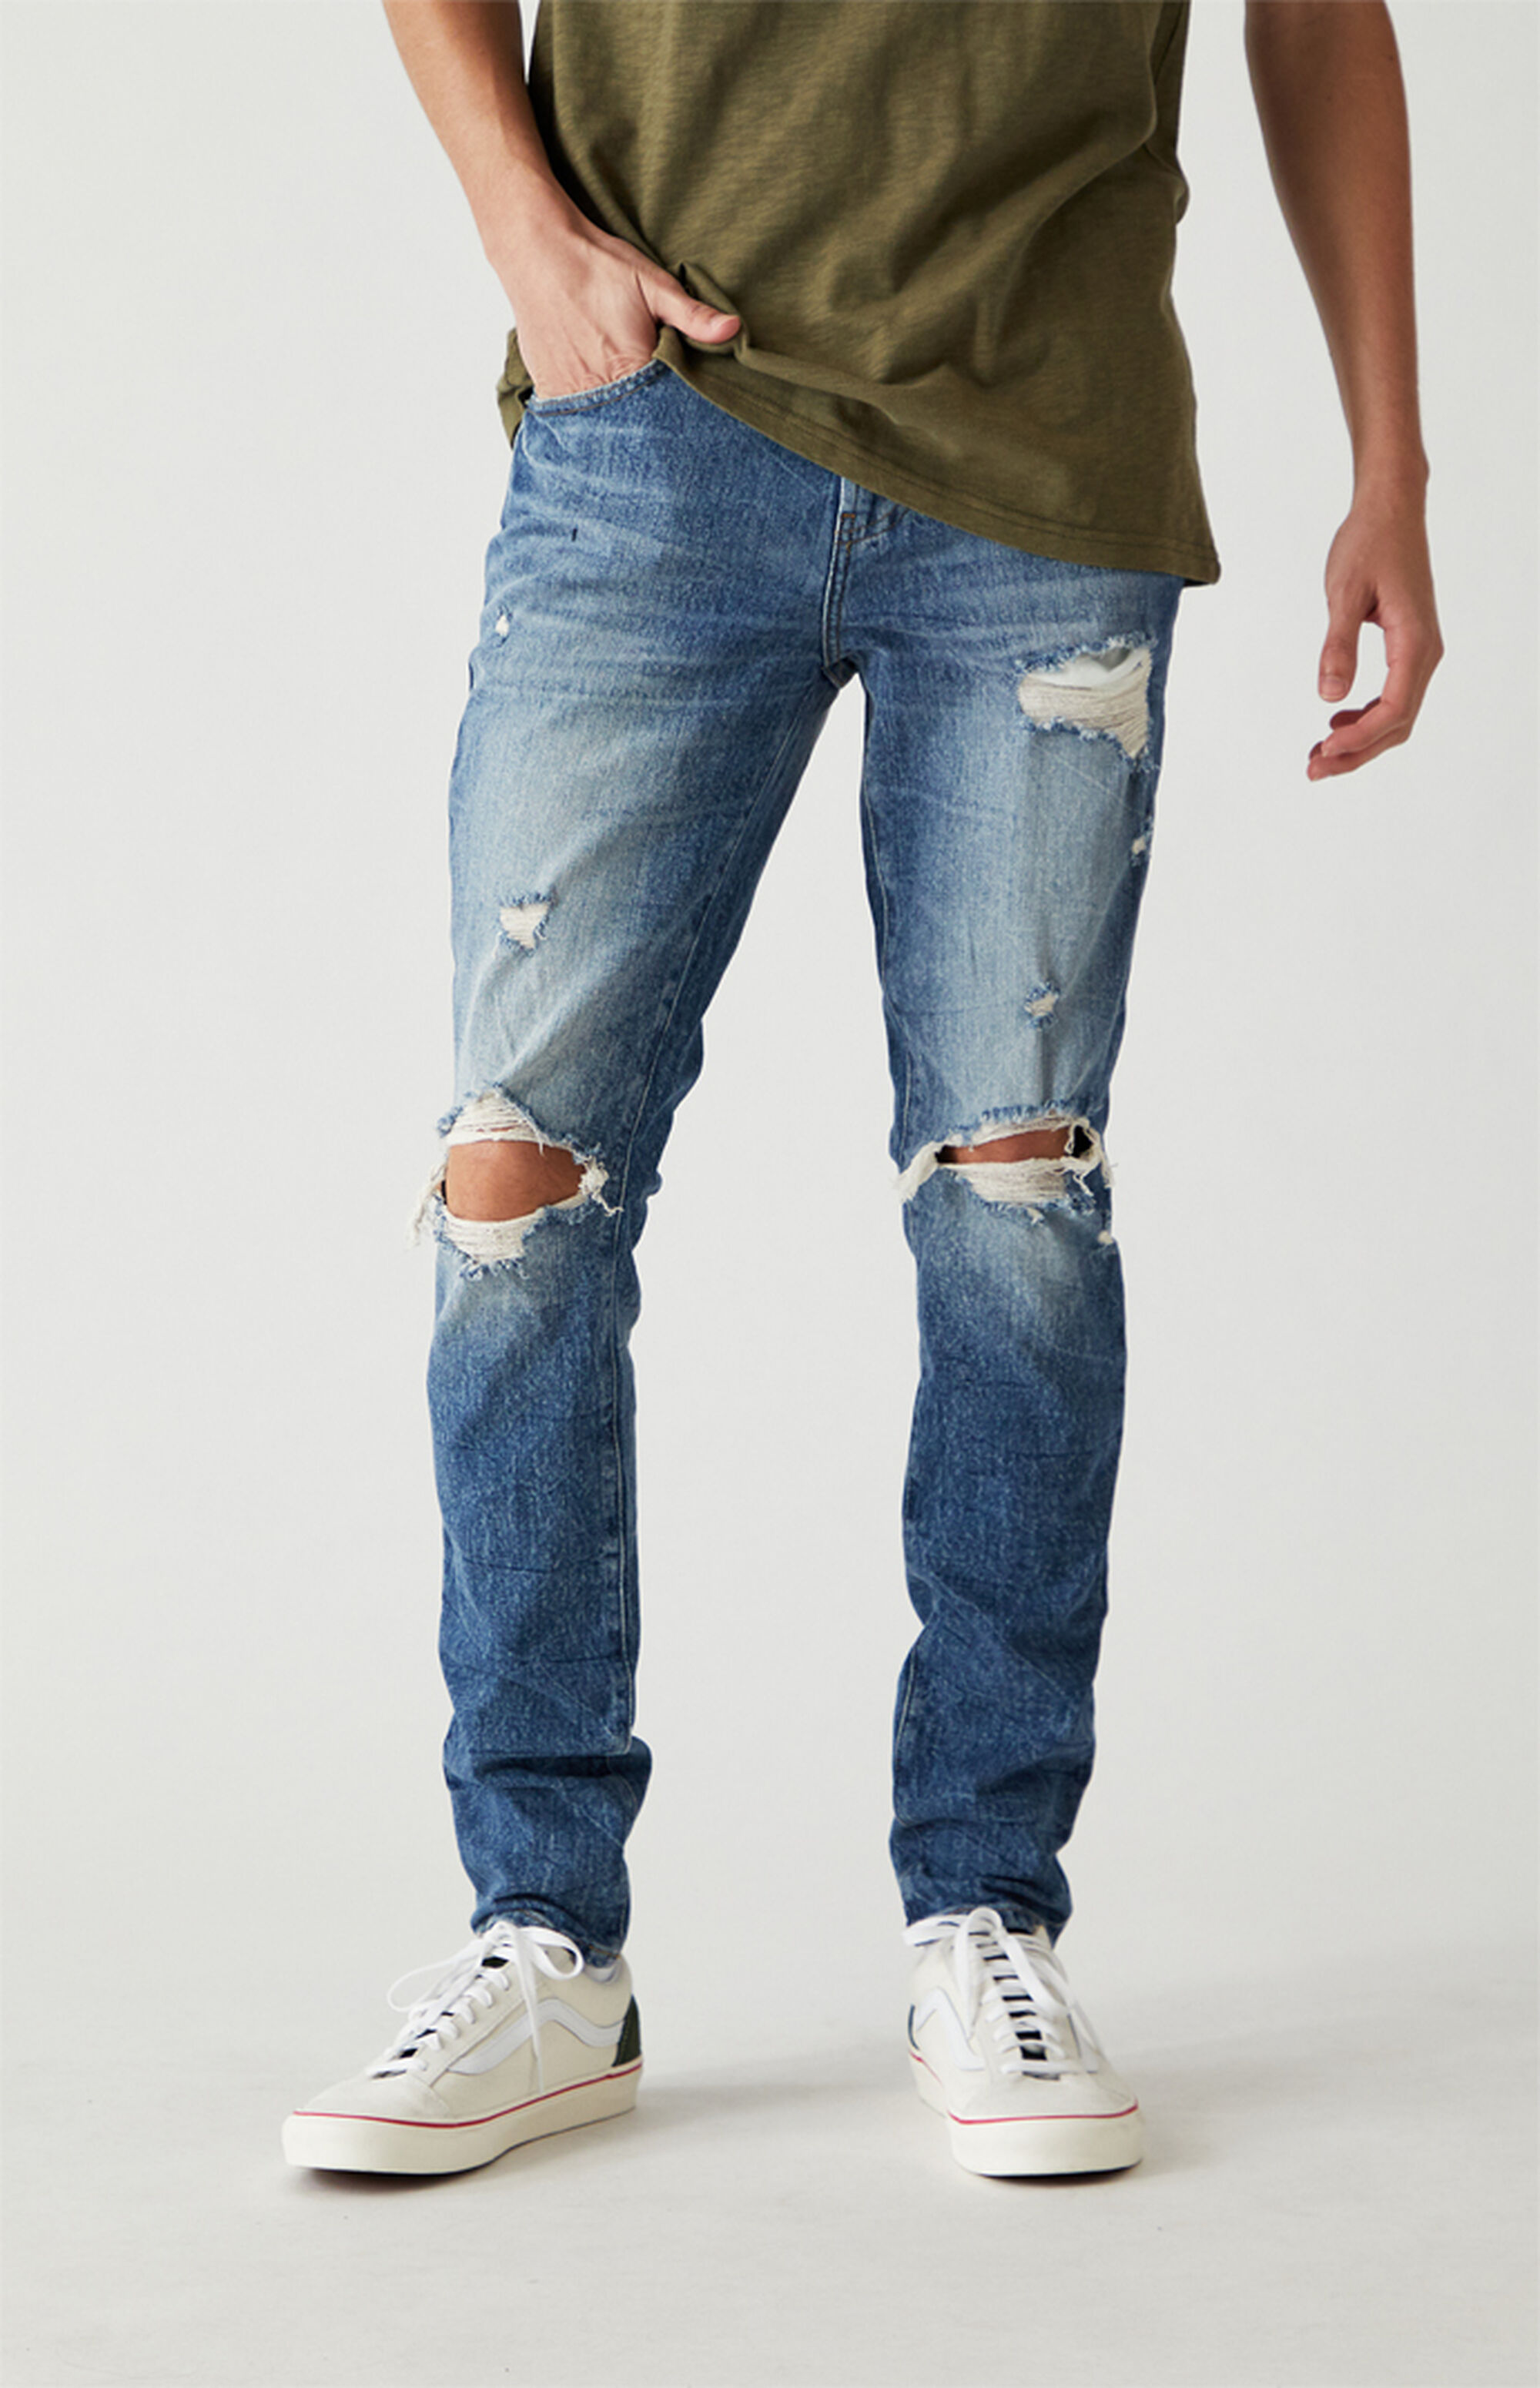 PacSun Medium Ripped Stacked Skinny Jeans | PacSun